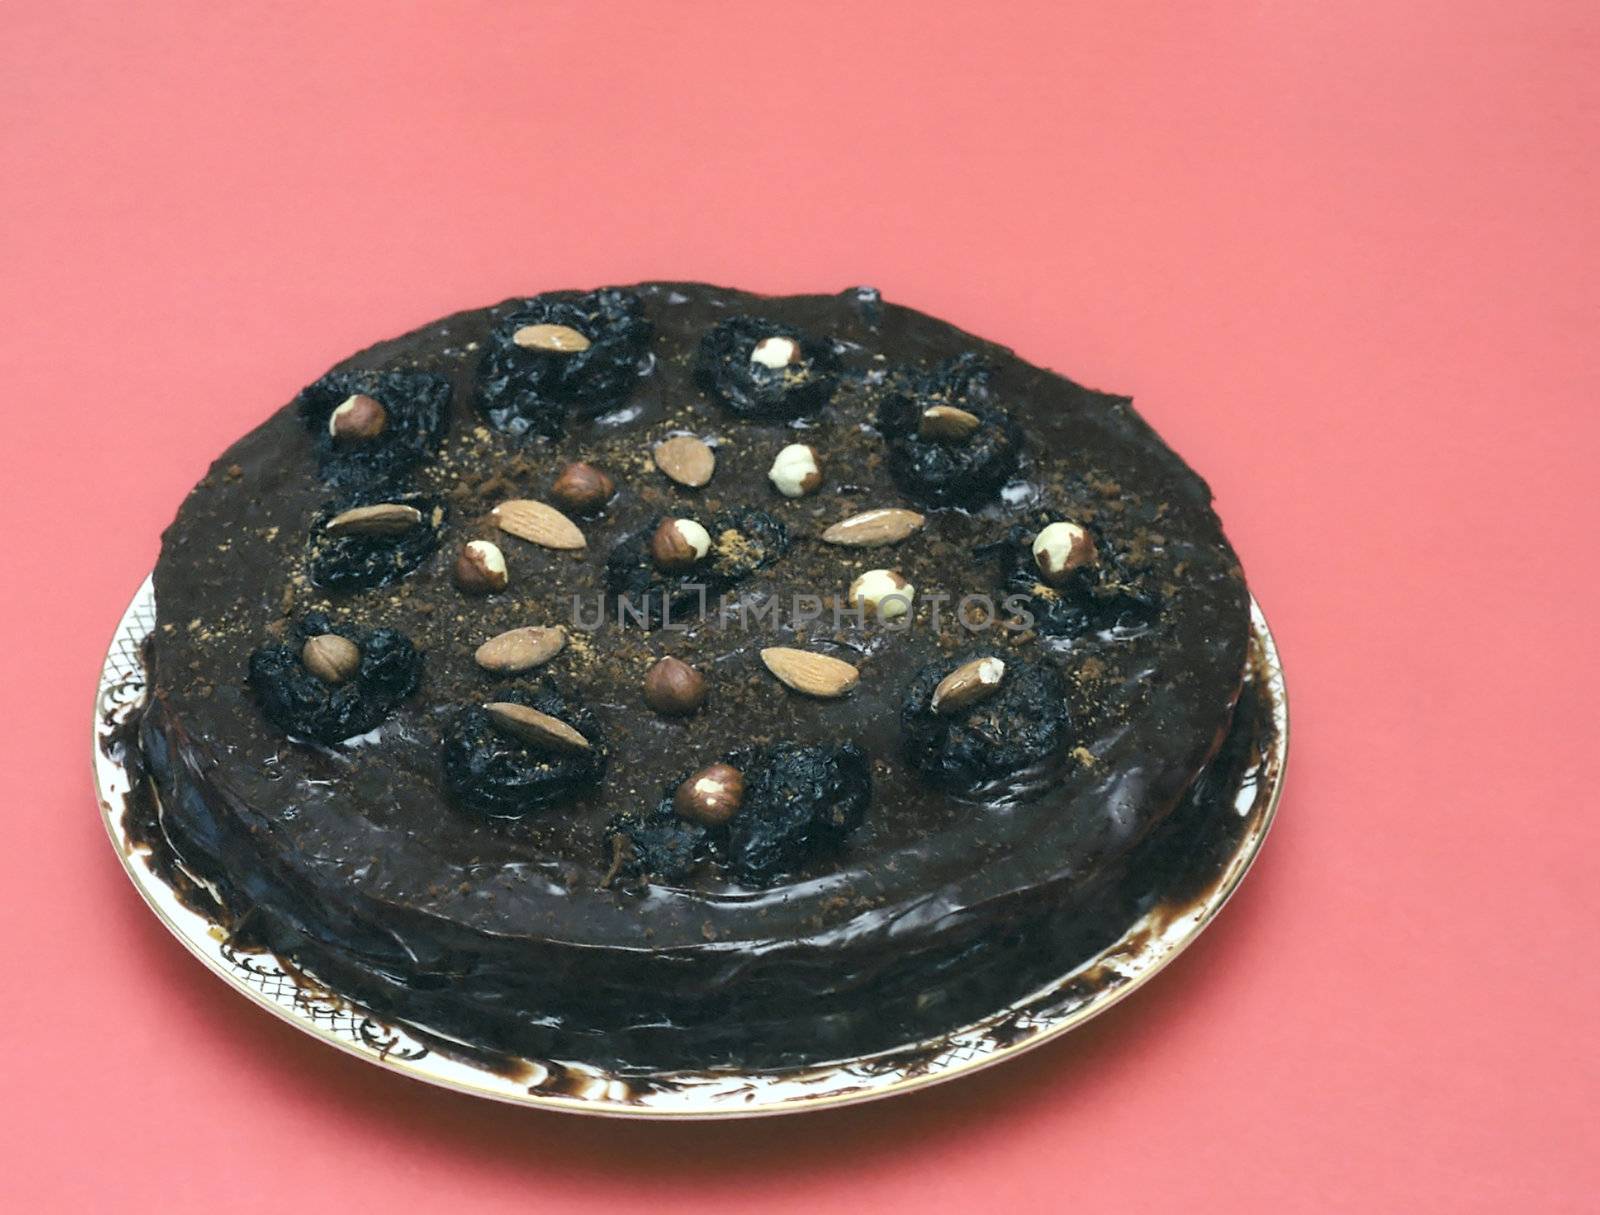 Black chocolate cake with nuts on red